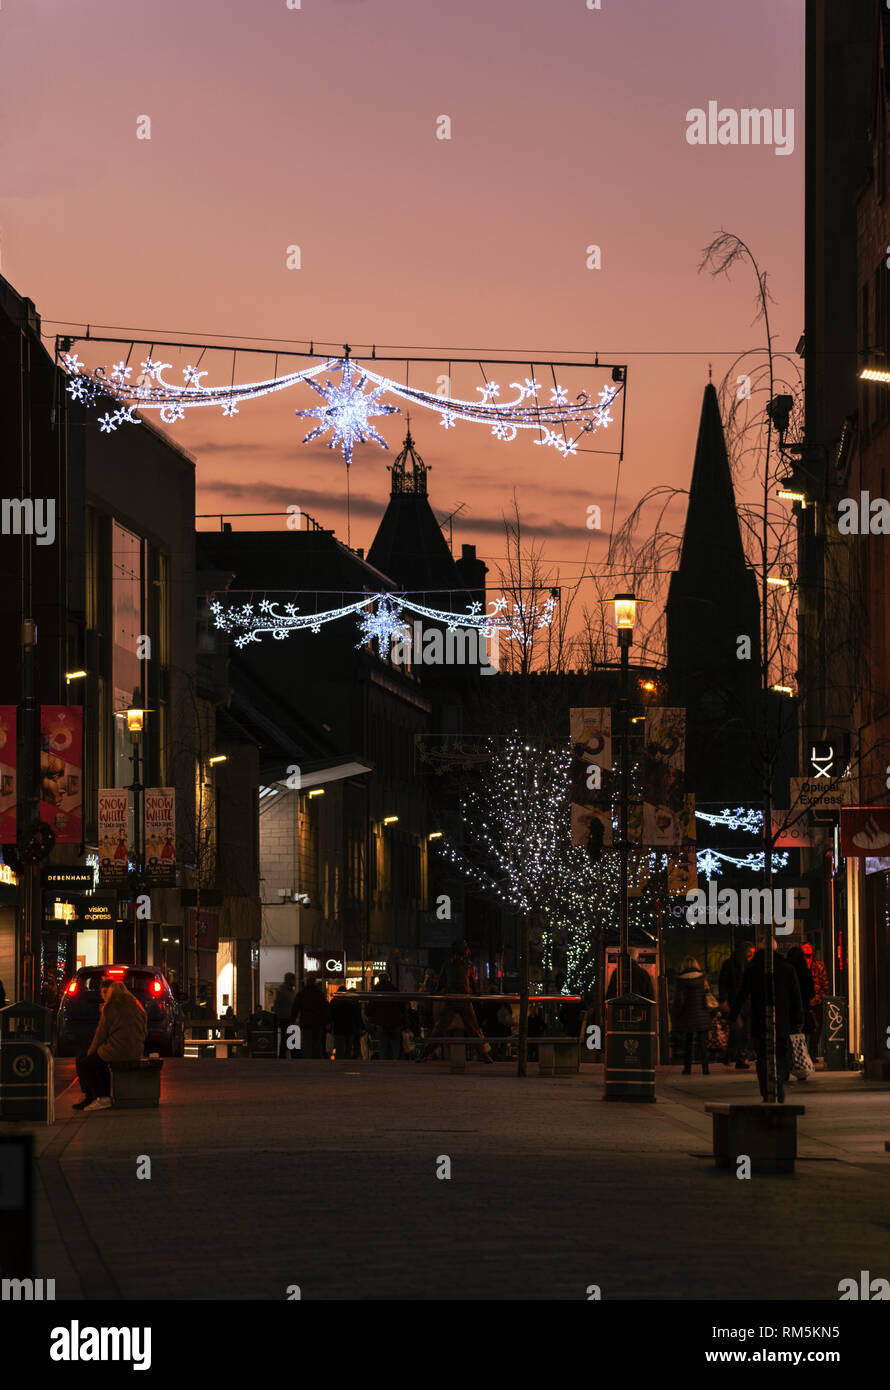 High street shoppers under Christmas lights at dusk in Perth, Scotland, UK Stock Photo